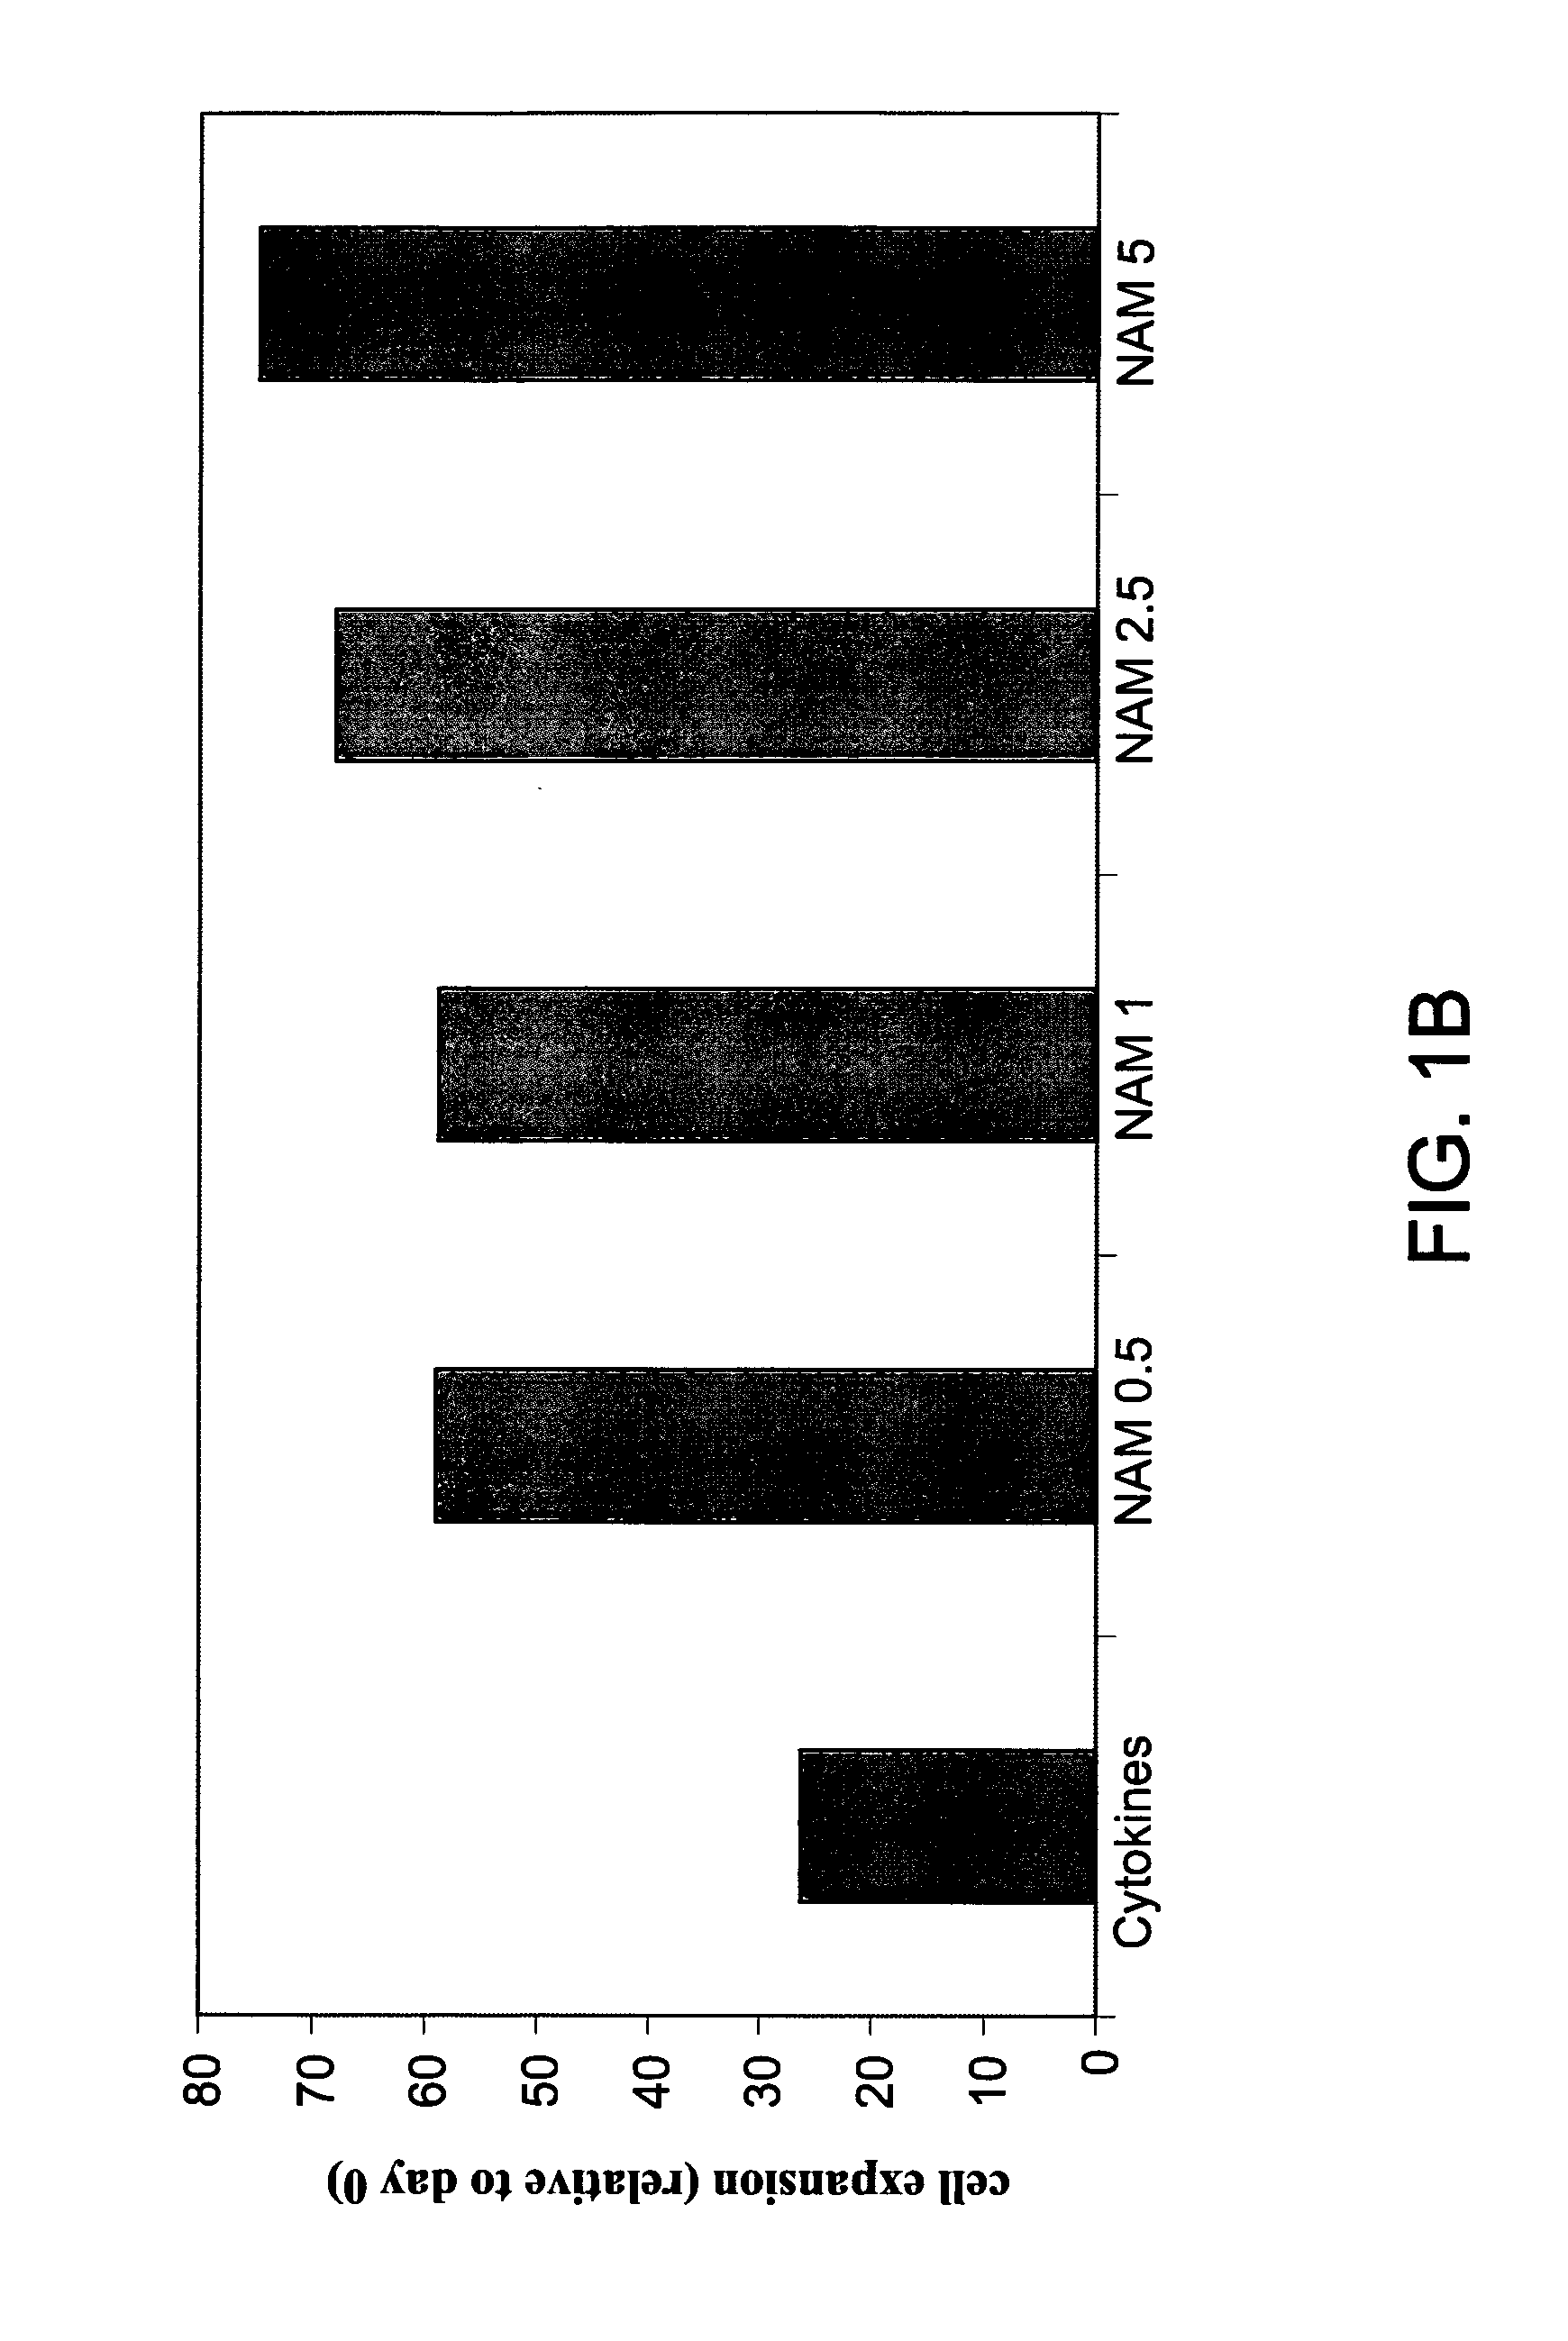 Methods for Enhancing Natural Killer Cell Proliferation and Activity